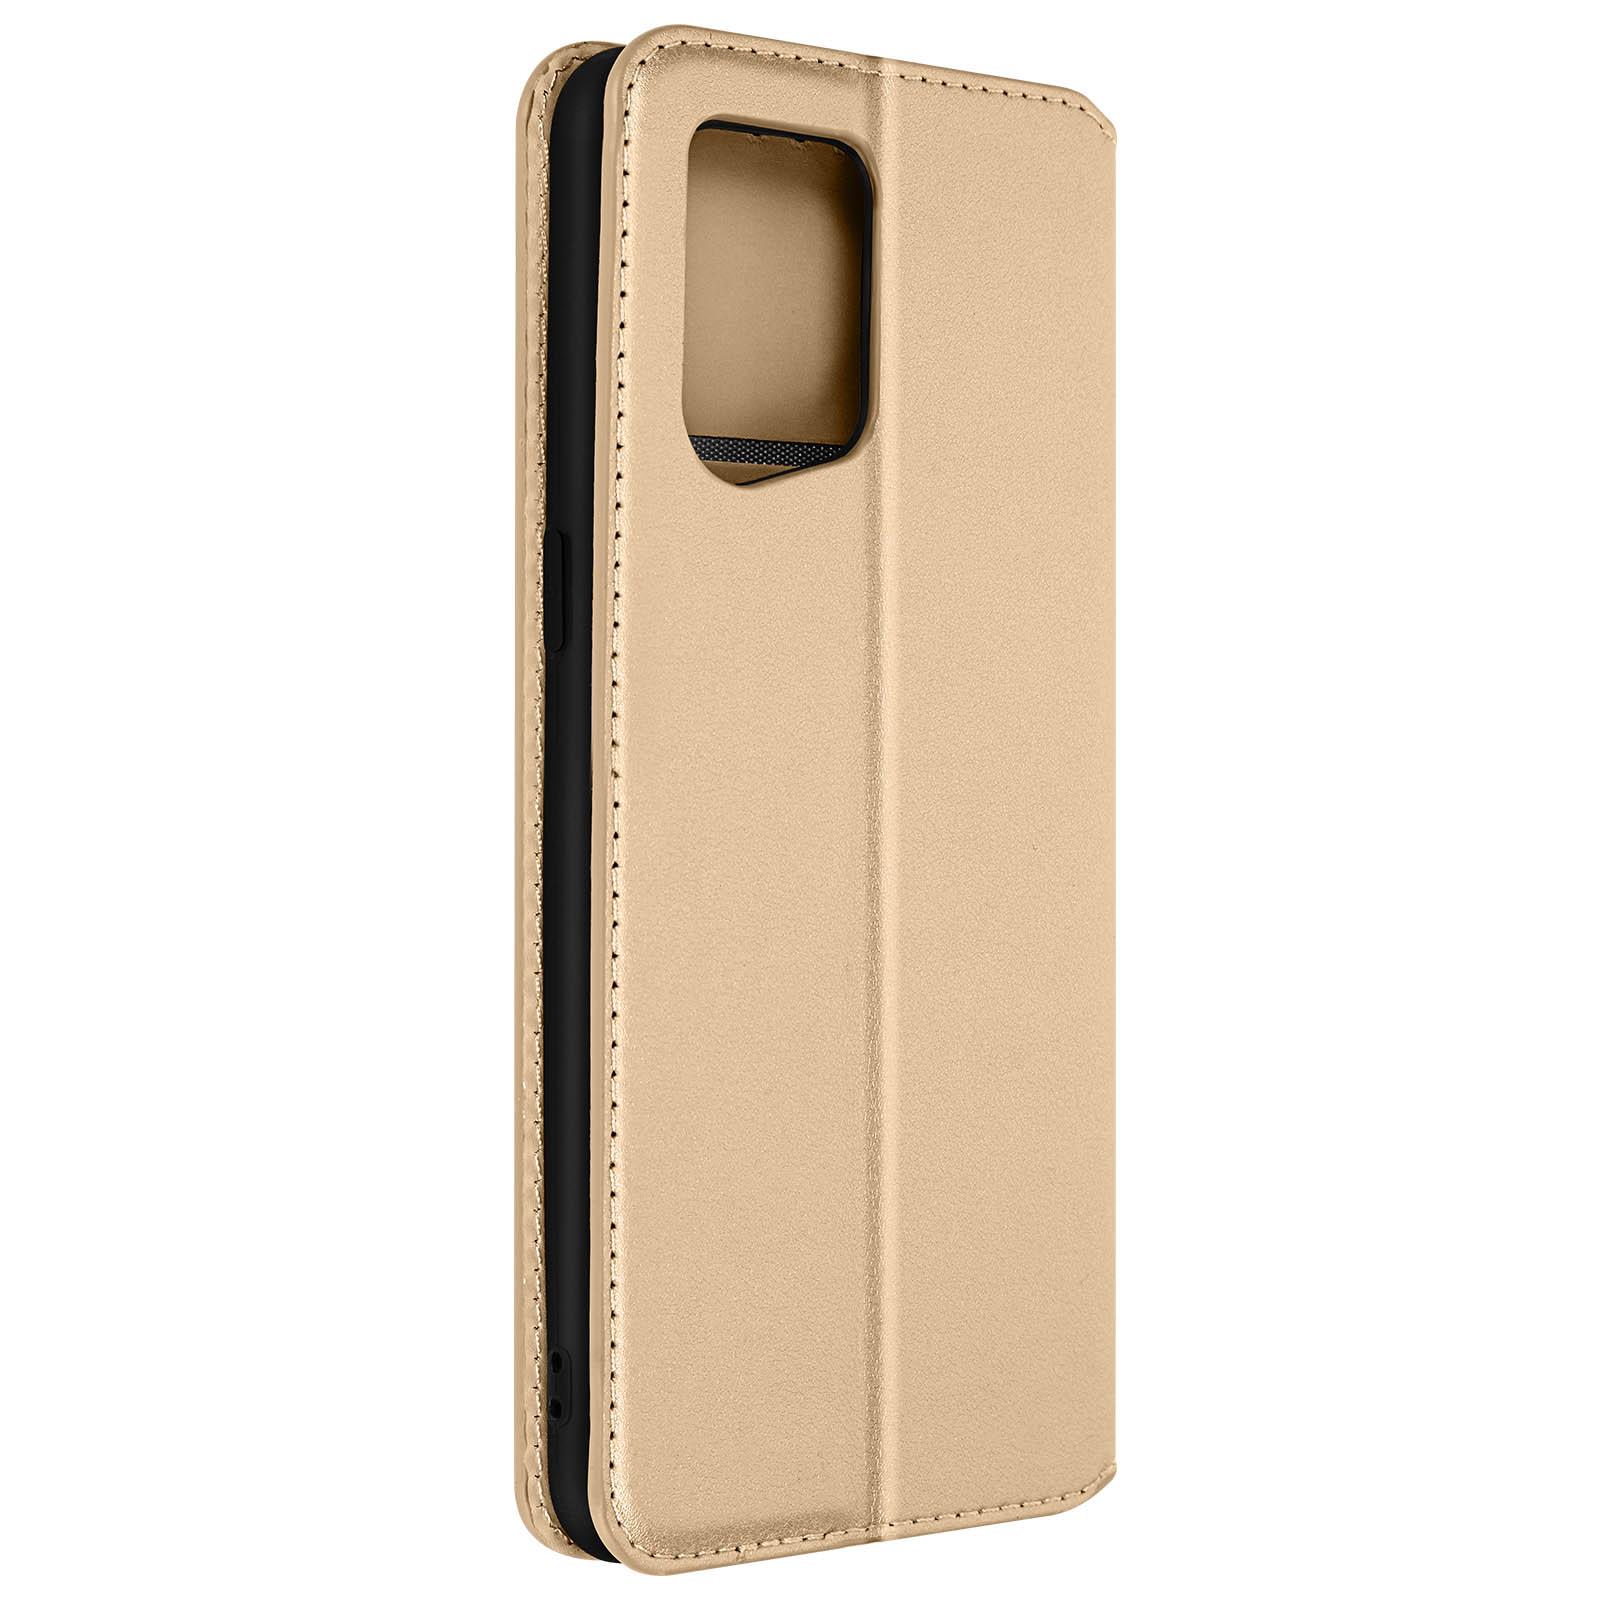 AVIZAR Classic Edition, Backcover mit Oppo, Oppo Series, Find Magnetklappe X5, Gold Bookcover